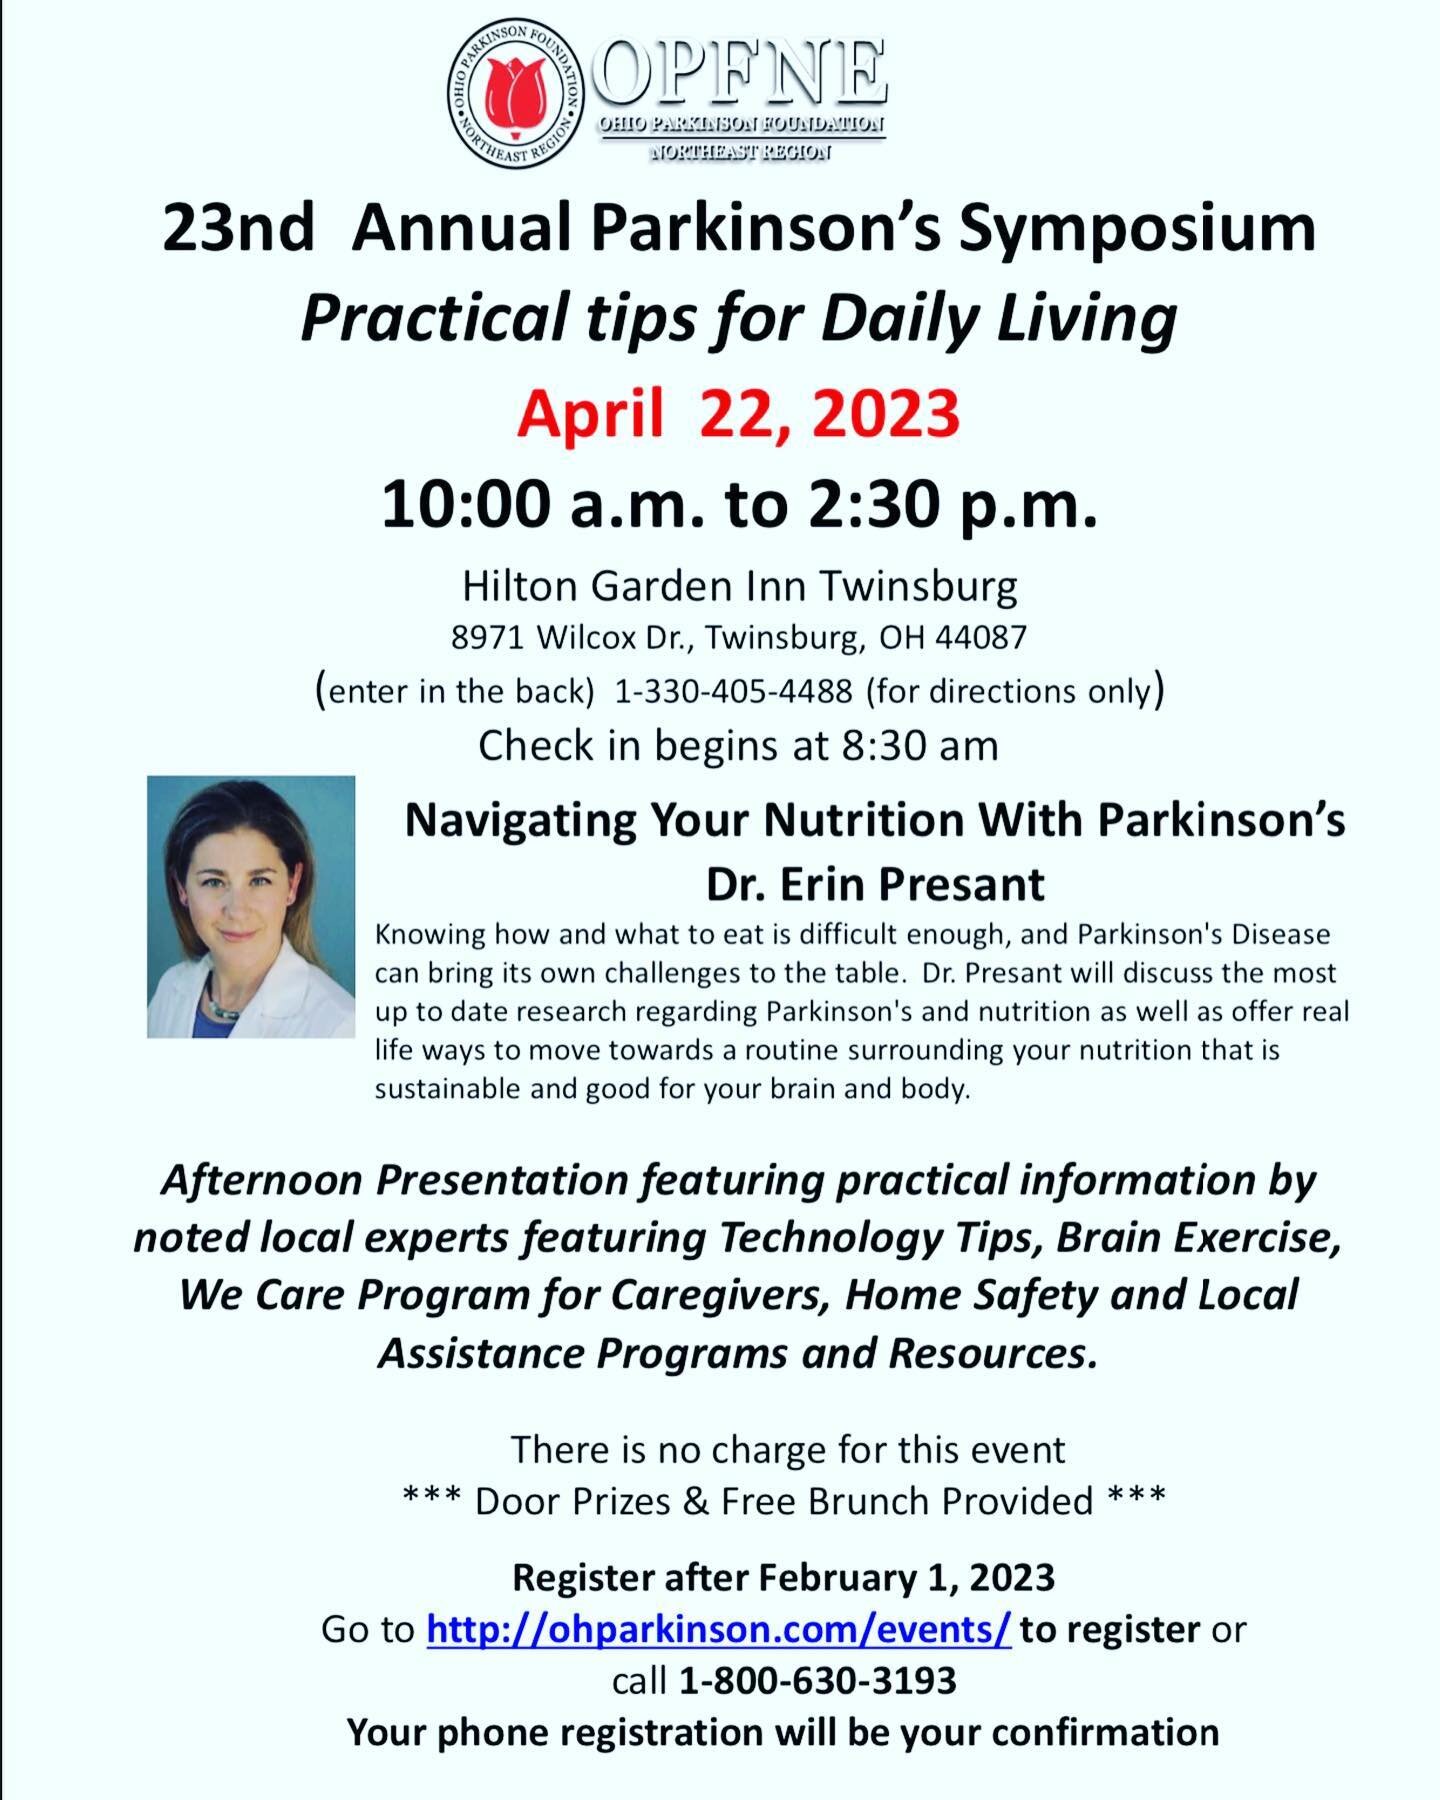 I&rsquo;m excited and honored to be the key note speaker at the Ohio Parkinson Foundation&rsquo;s Annual Parkinson&rsquo;s Symposium this weekend.

Brain health is impacted by what we eat and when dealing with an illness like PD it can make a differe